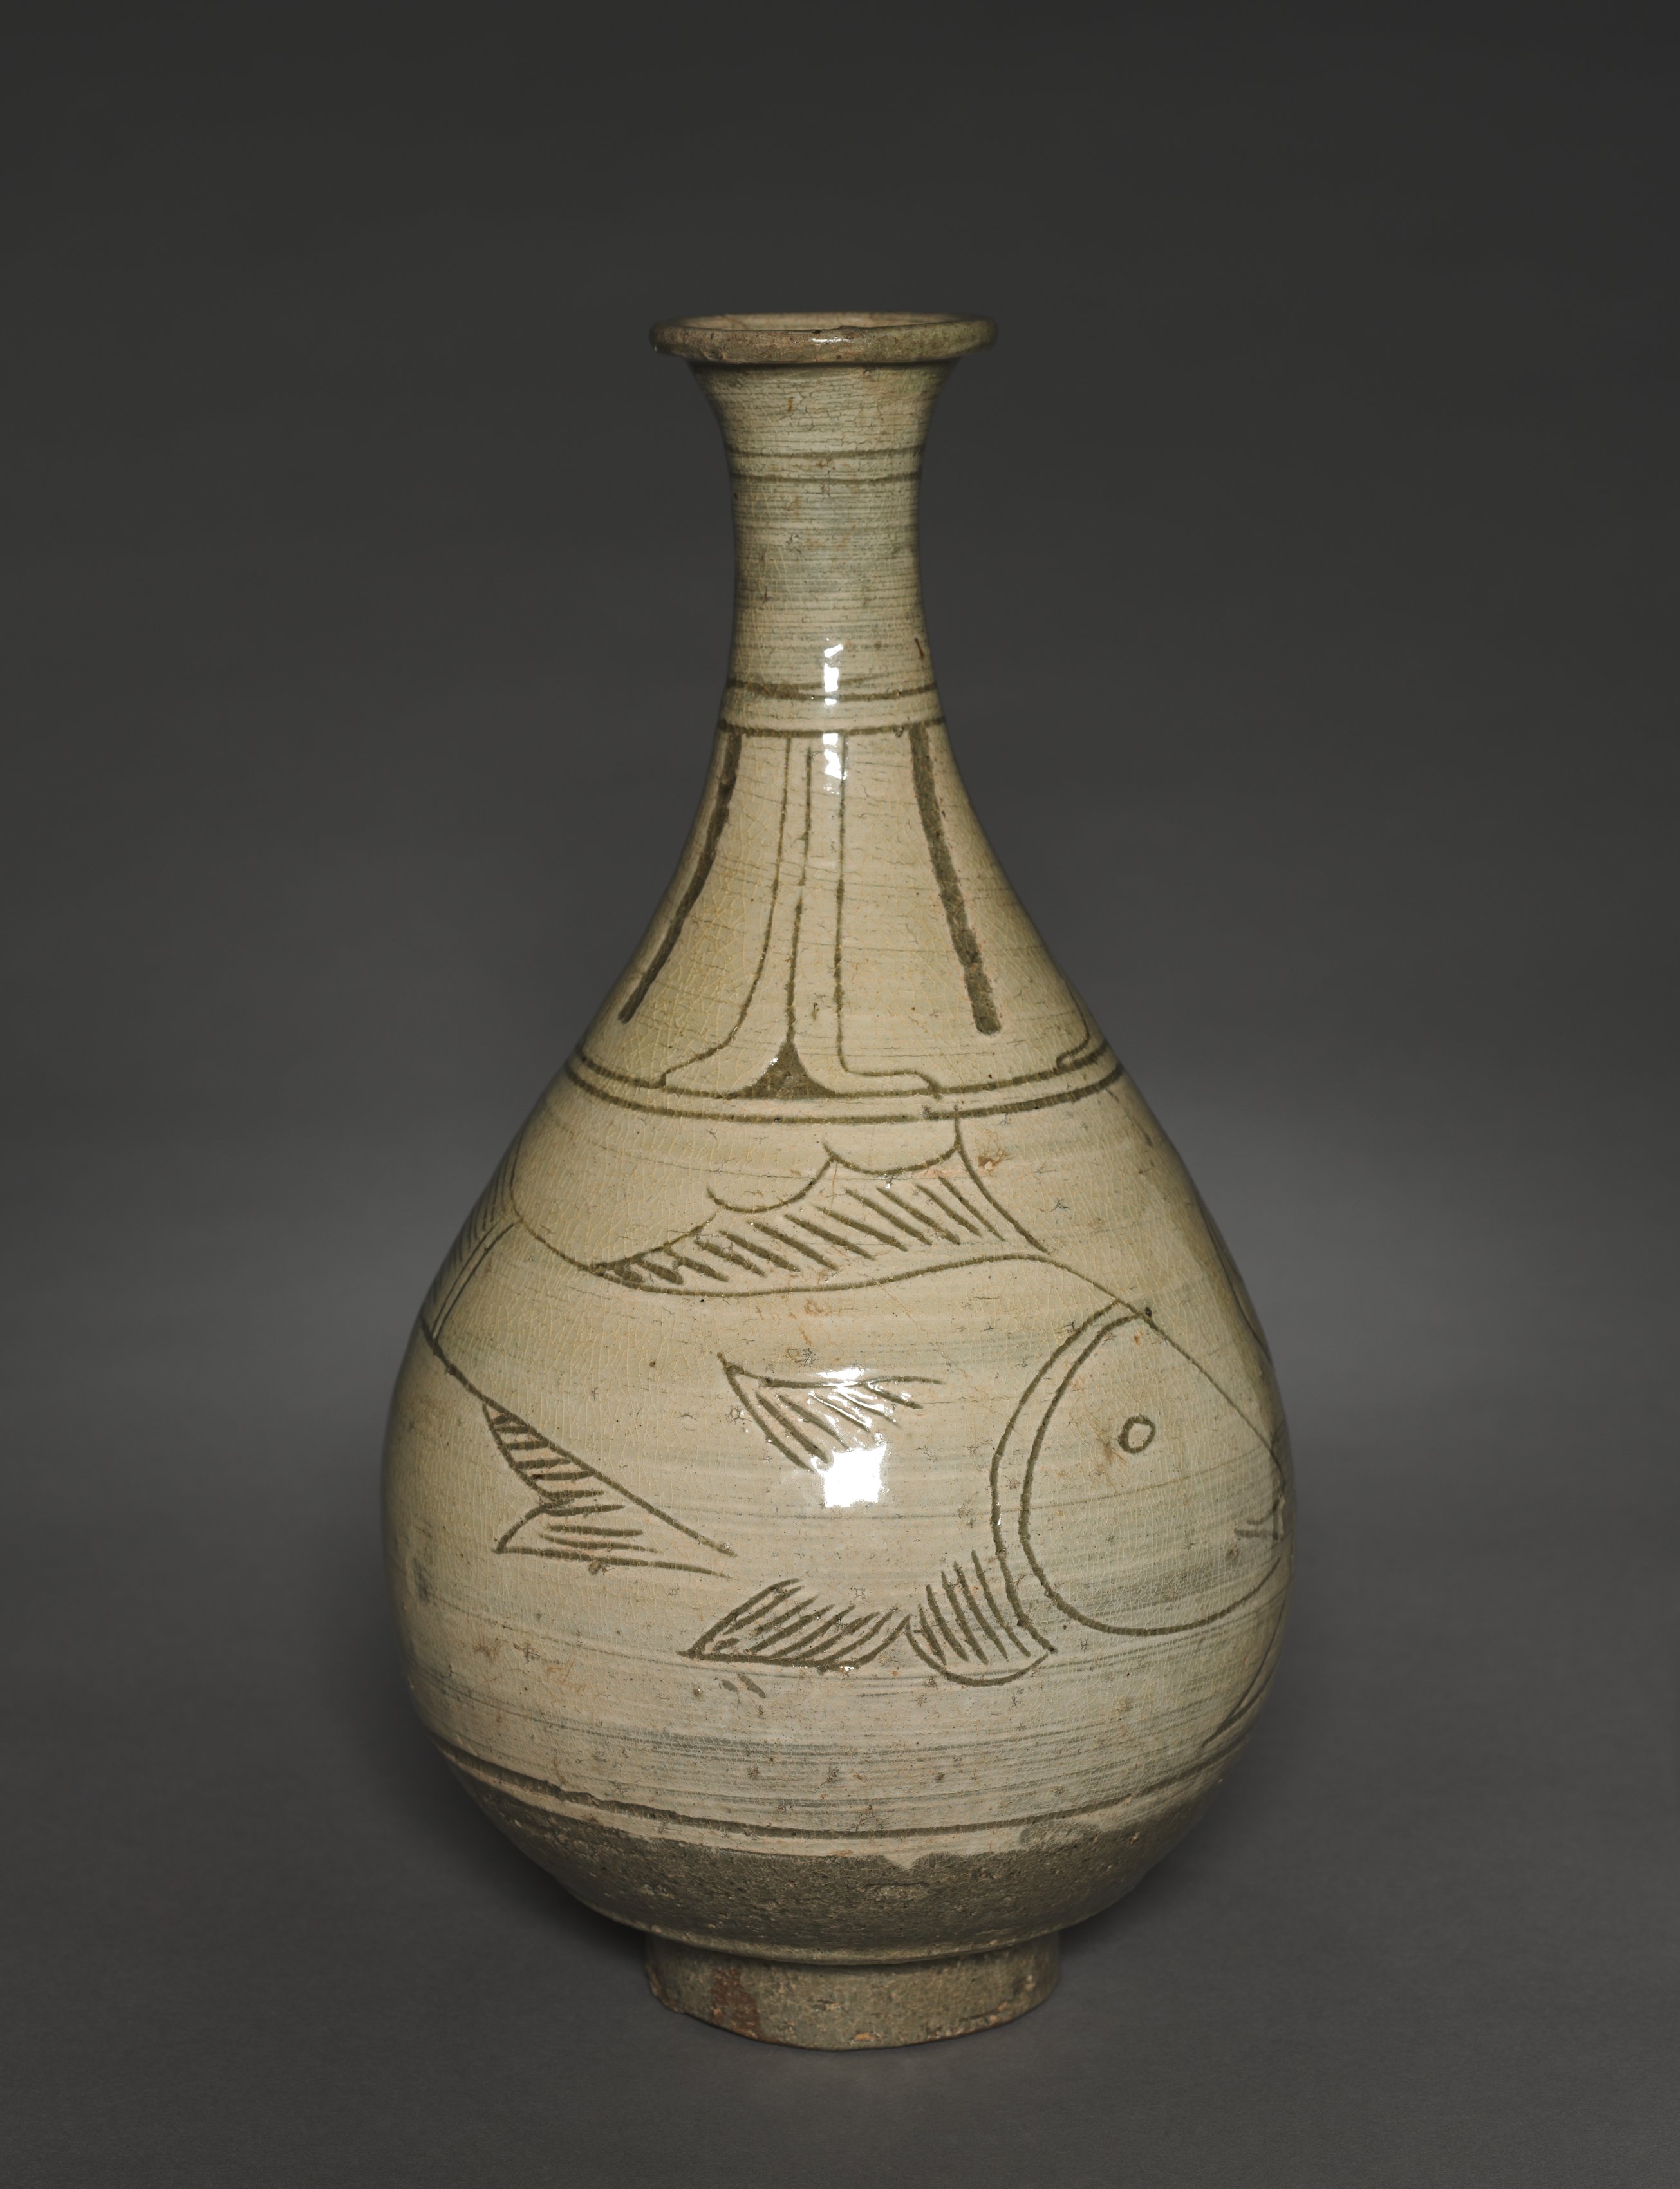 Bottle with Incised and Sgraffito Fish Design